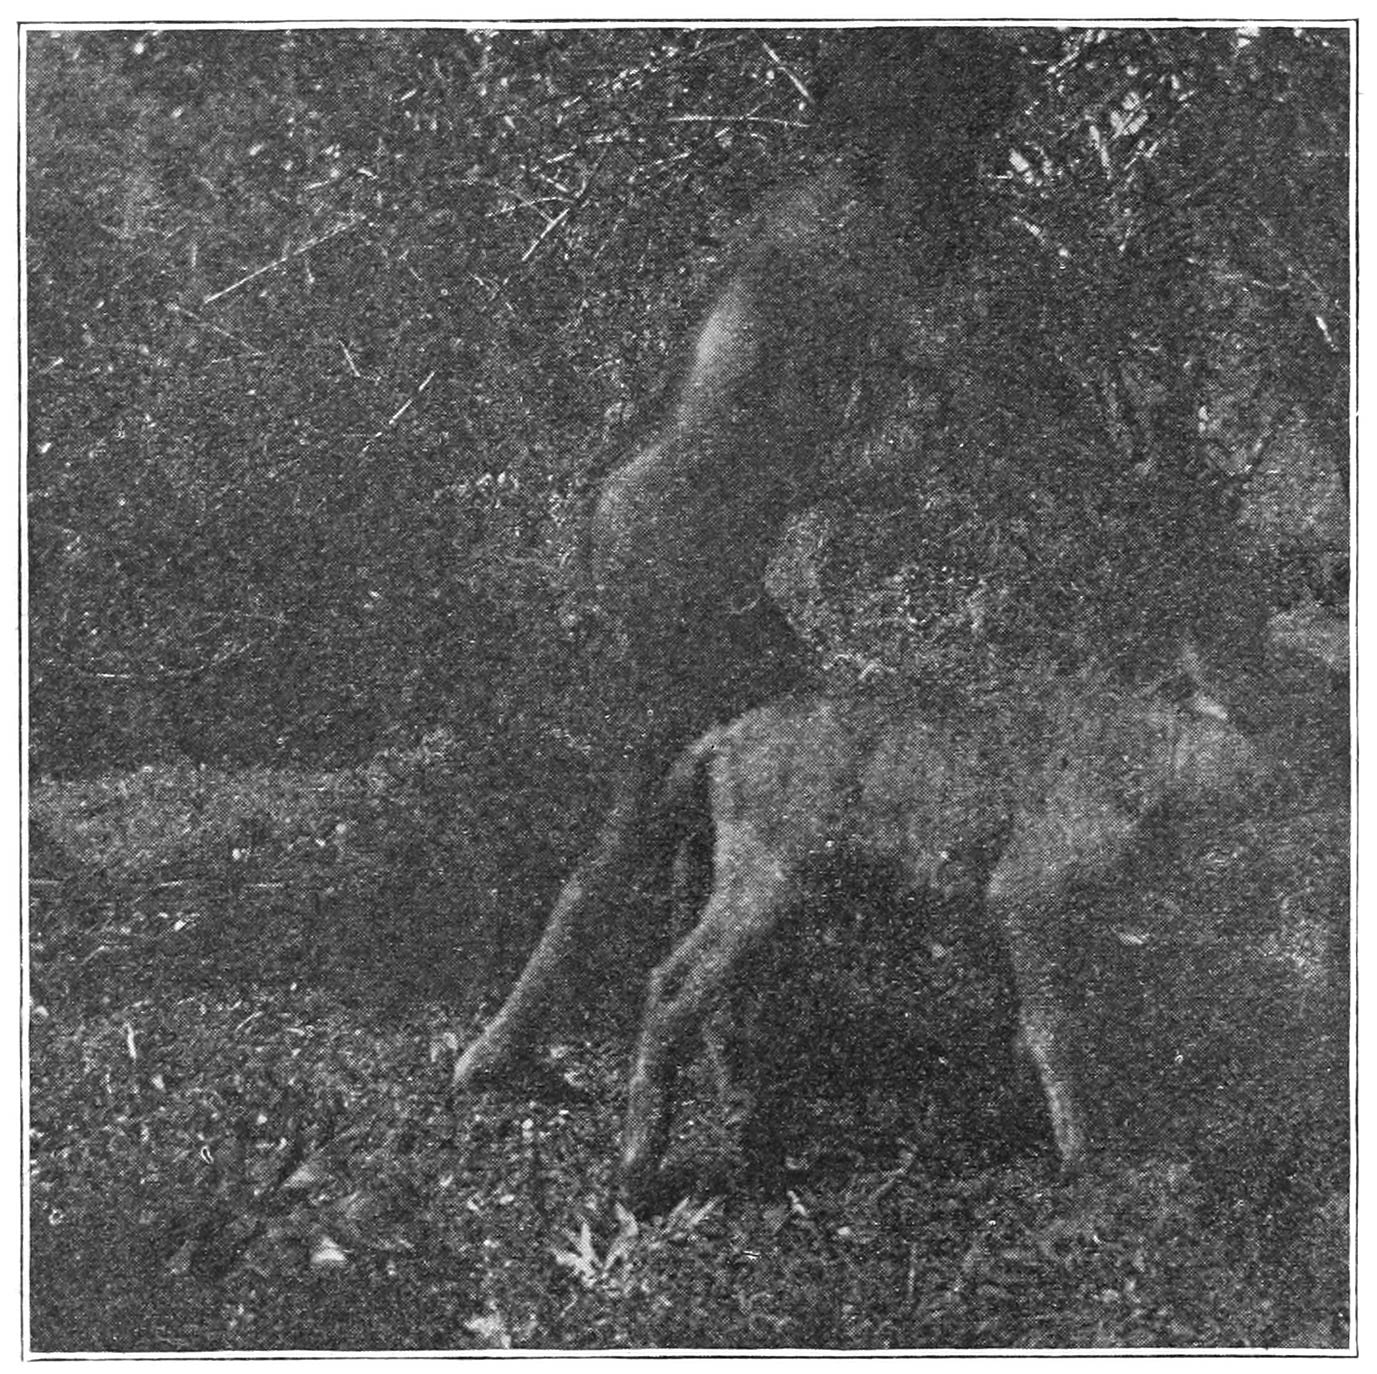 FIG. 39.—STROKING THE BACK OF THE CALF WITH THE ‘TOASHTITUDR.’ PUNATVAN IS BEGINNING THE THIRD MOVEMENT, AND ONE OF THE BRANCHES OF LEAVES CAN BE SEEN ON THE GROUND BEHIND THE CALF.